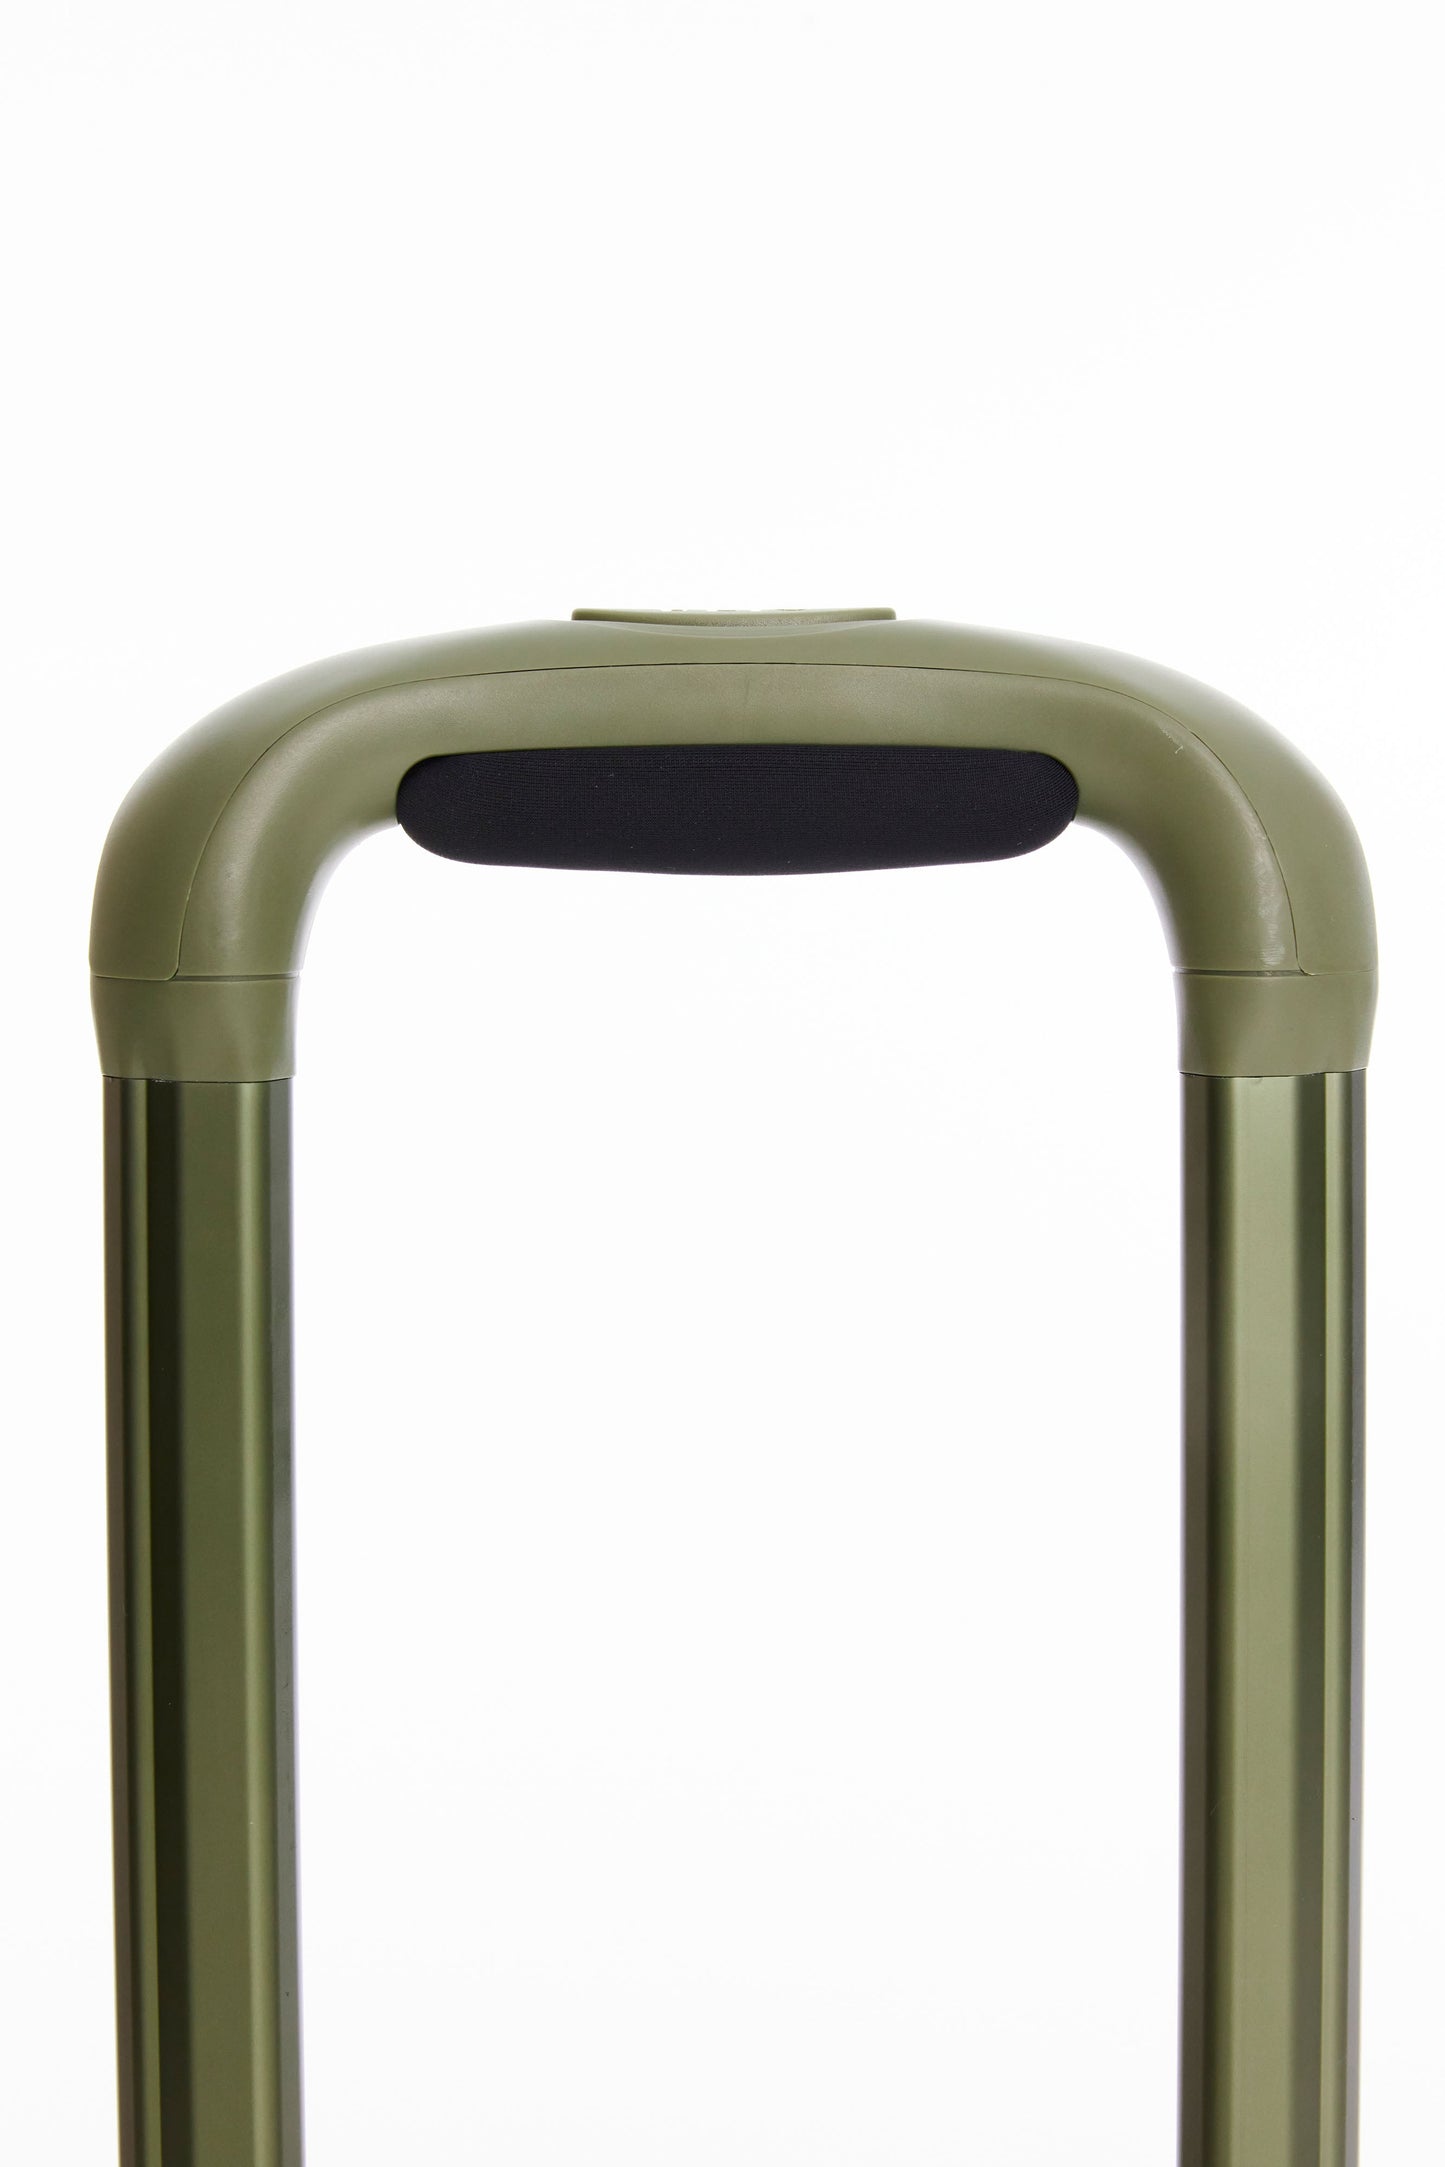 The 29" Large Check-In Roller in Olive